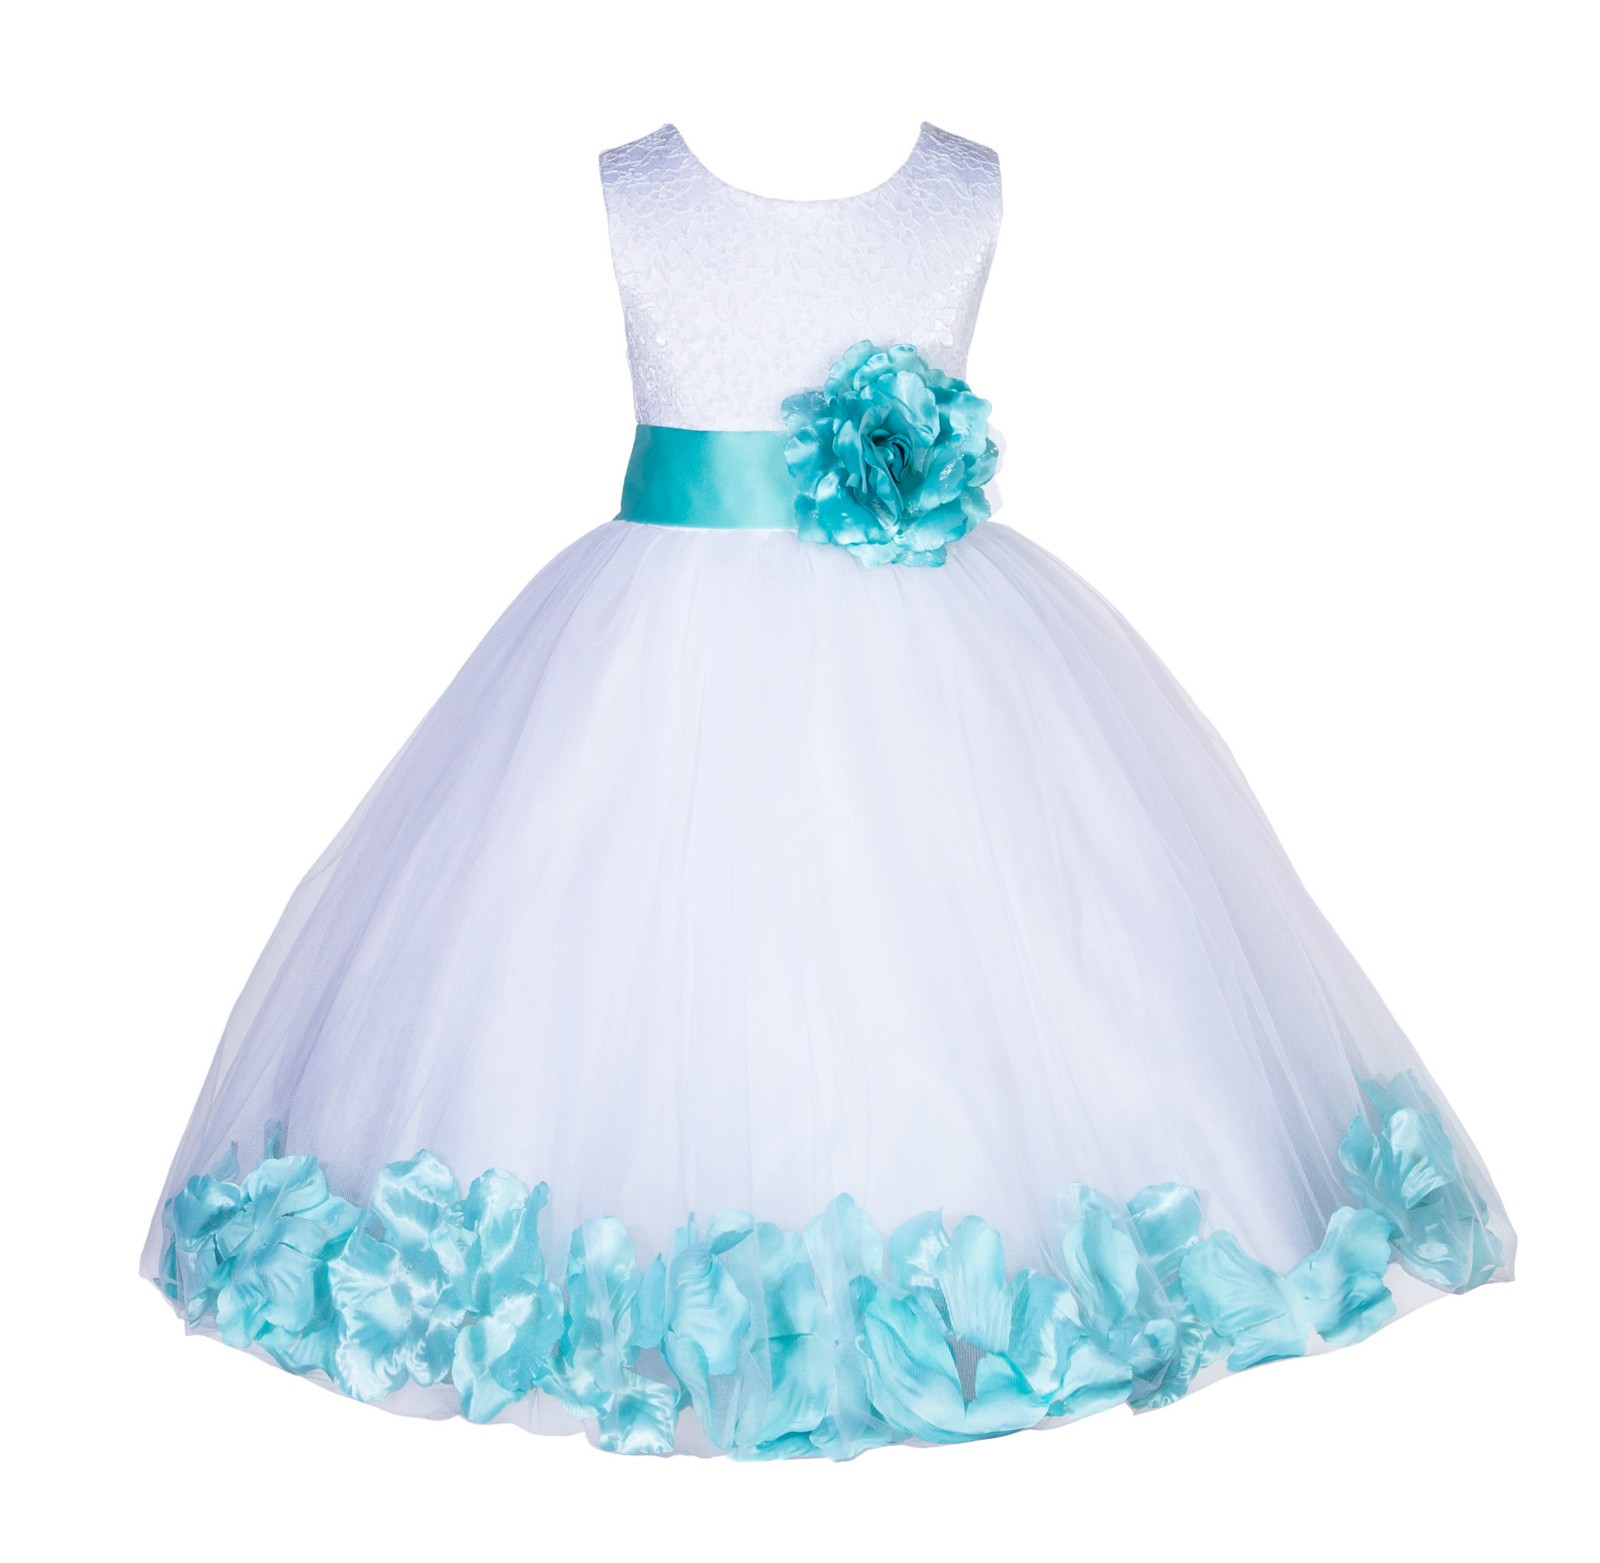 White/Tiffany Blue Lace Top Tulle Floral Petals Flower Girl Dress 165S